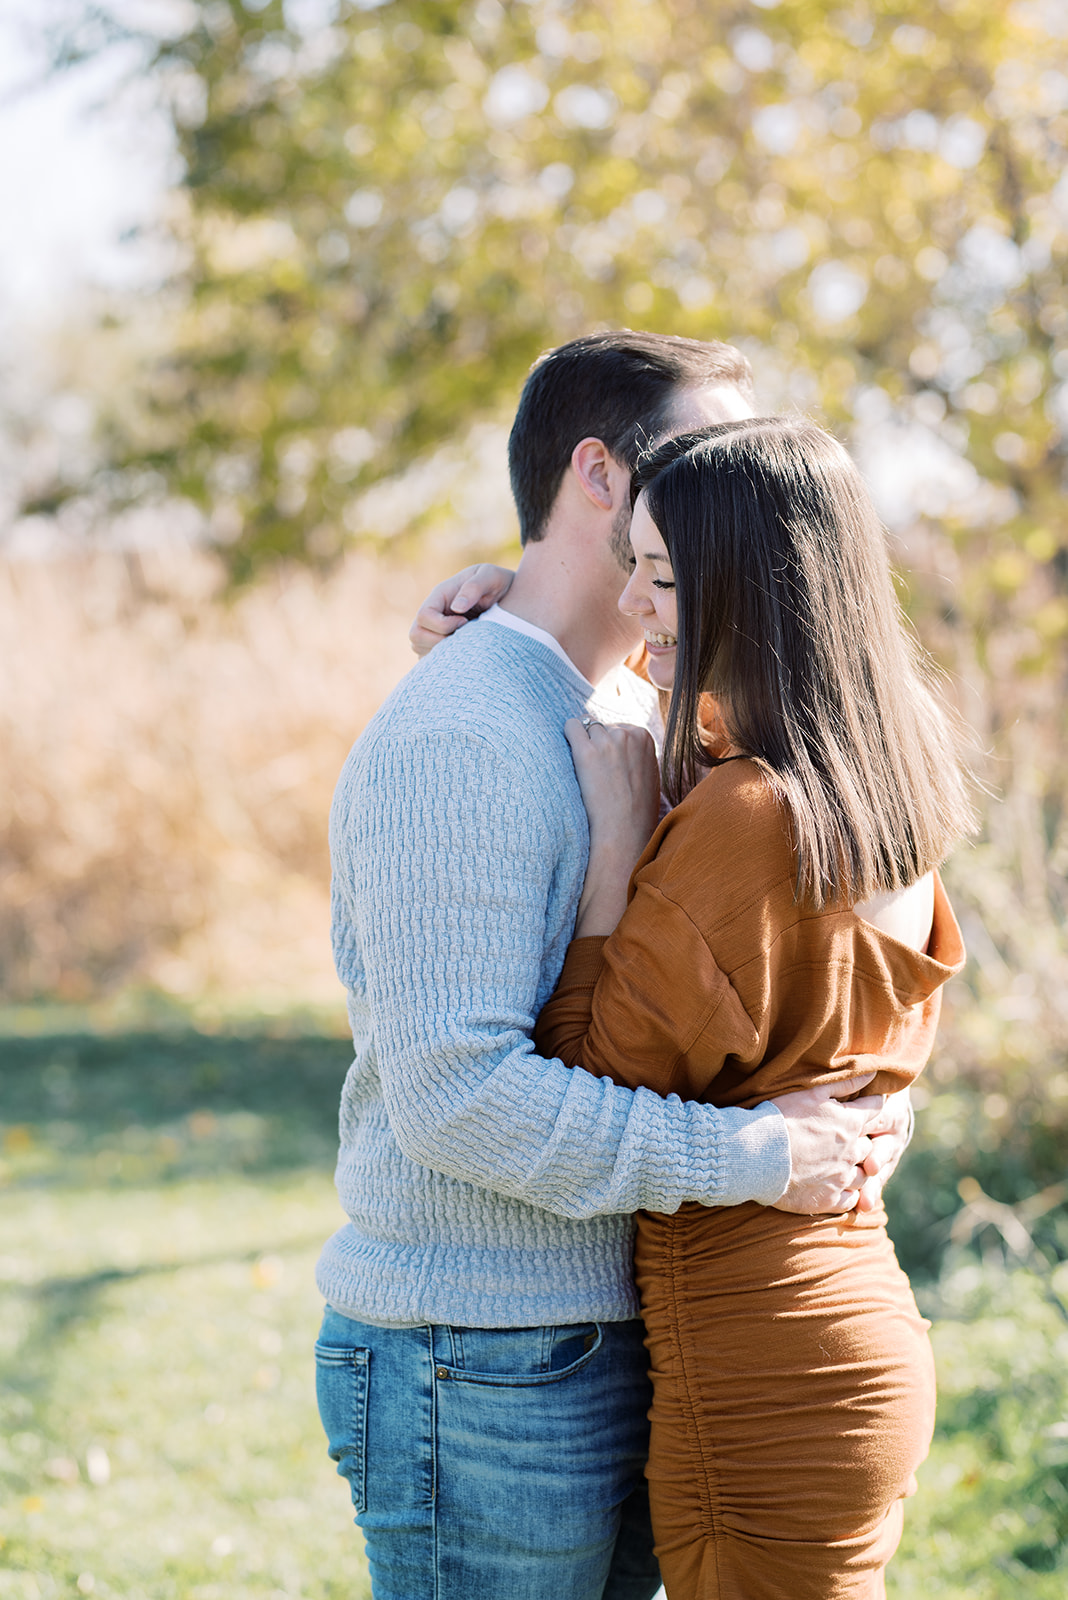 Picnic Point Engagement Session Madison Wisconsin Meghan Lee Harris Photography Ideas Inspiration Trail Nature Fall Wedd